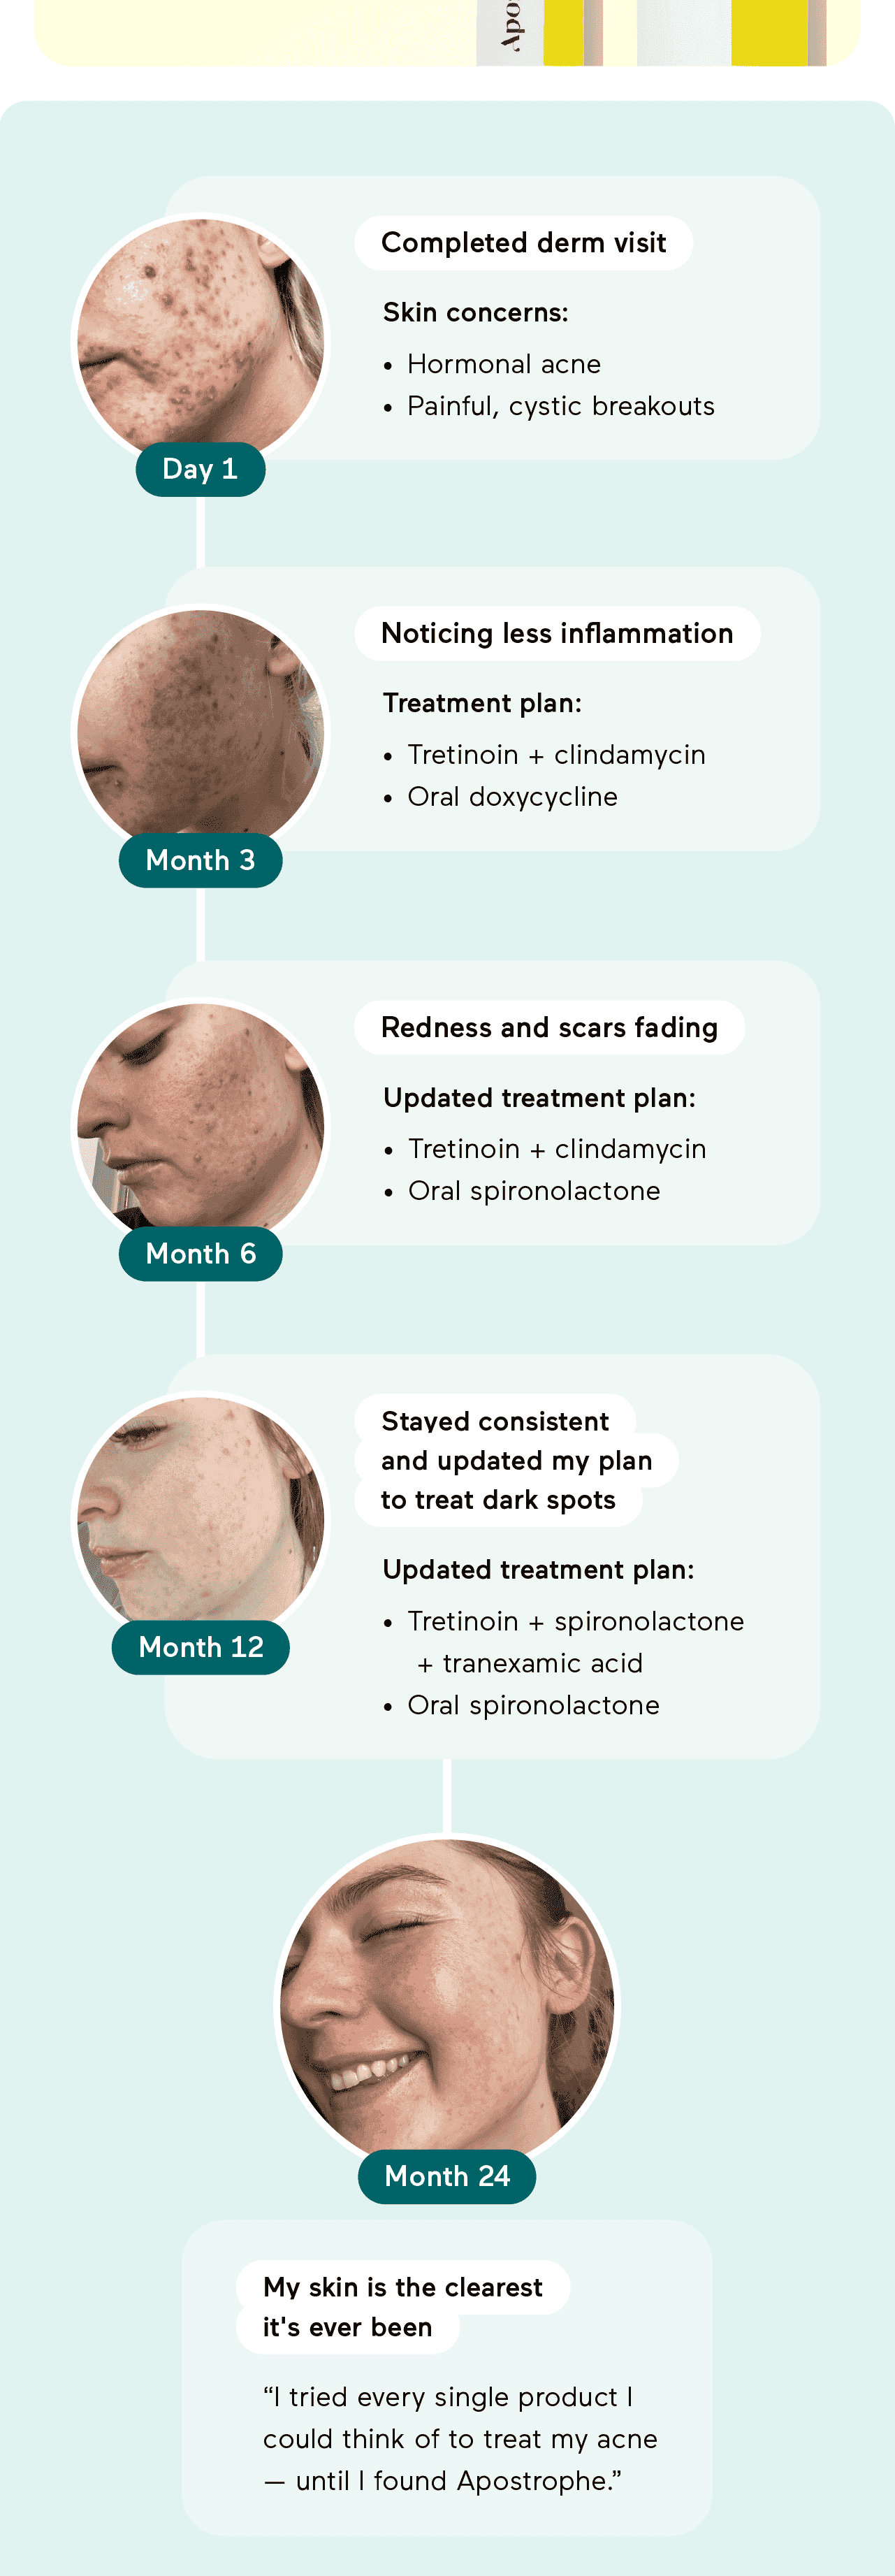 Day 1: Completed derm visit. Skin concerns: Skin concerns:Hormonal acne, Painful, cystic breakouts. Month 3: Noticing less inflammation. Treatment plan: Tretinoin + clindamycin, Oral doxycycline. Month 6: Redness and scars fading. Updated treatment plan: Tretinoin + clindamycin, Oral spironolactone. Month 12: Stayed consistent and updated my plan to treat my dark spots. Updated treatment plan: Tretinoin + spironolactone + tranexamic acid. Oral spironolactone. Month 24: My skin is the clearest it's ever been. I tried every single product I could think of to treat my acne - until I found Apostrophe.